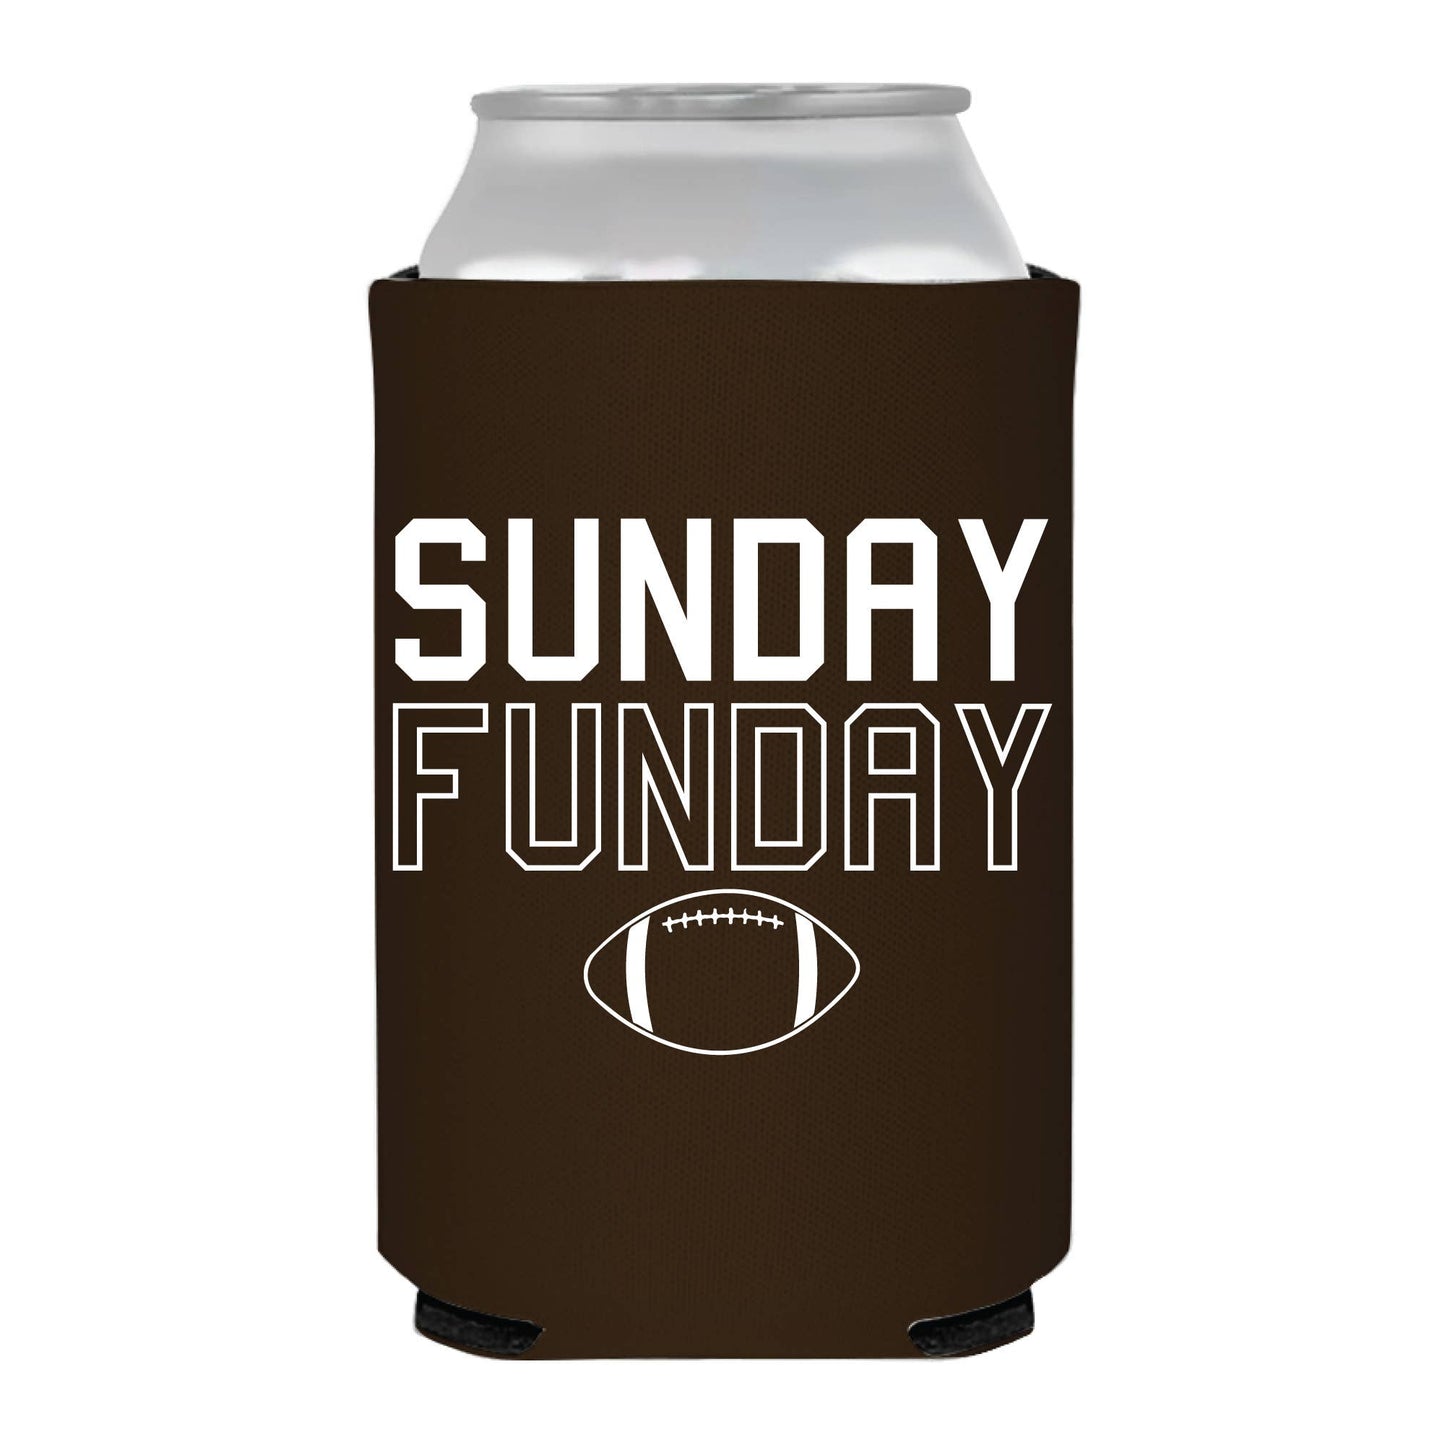 Sip Hip Hooray - Sunday Funday Football Tailgate Brown Can Cooler - Sports